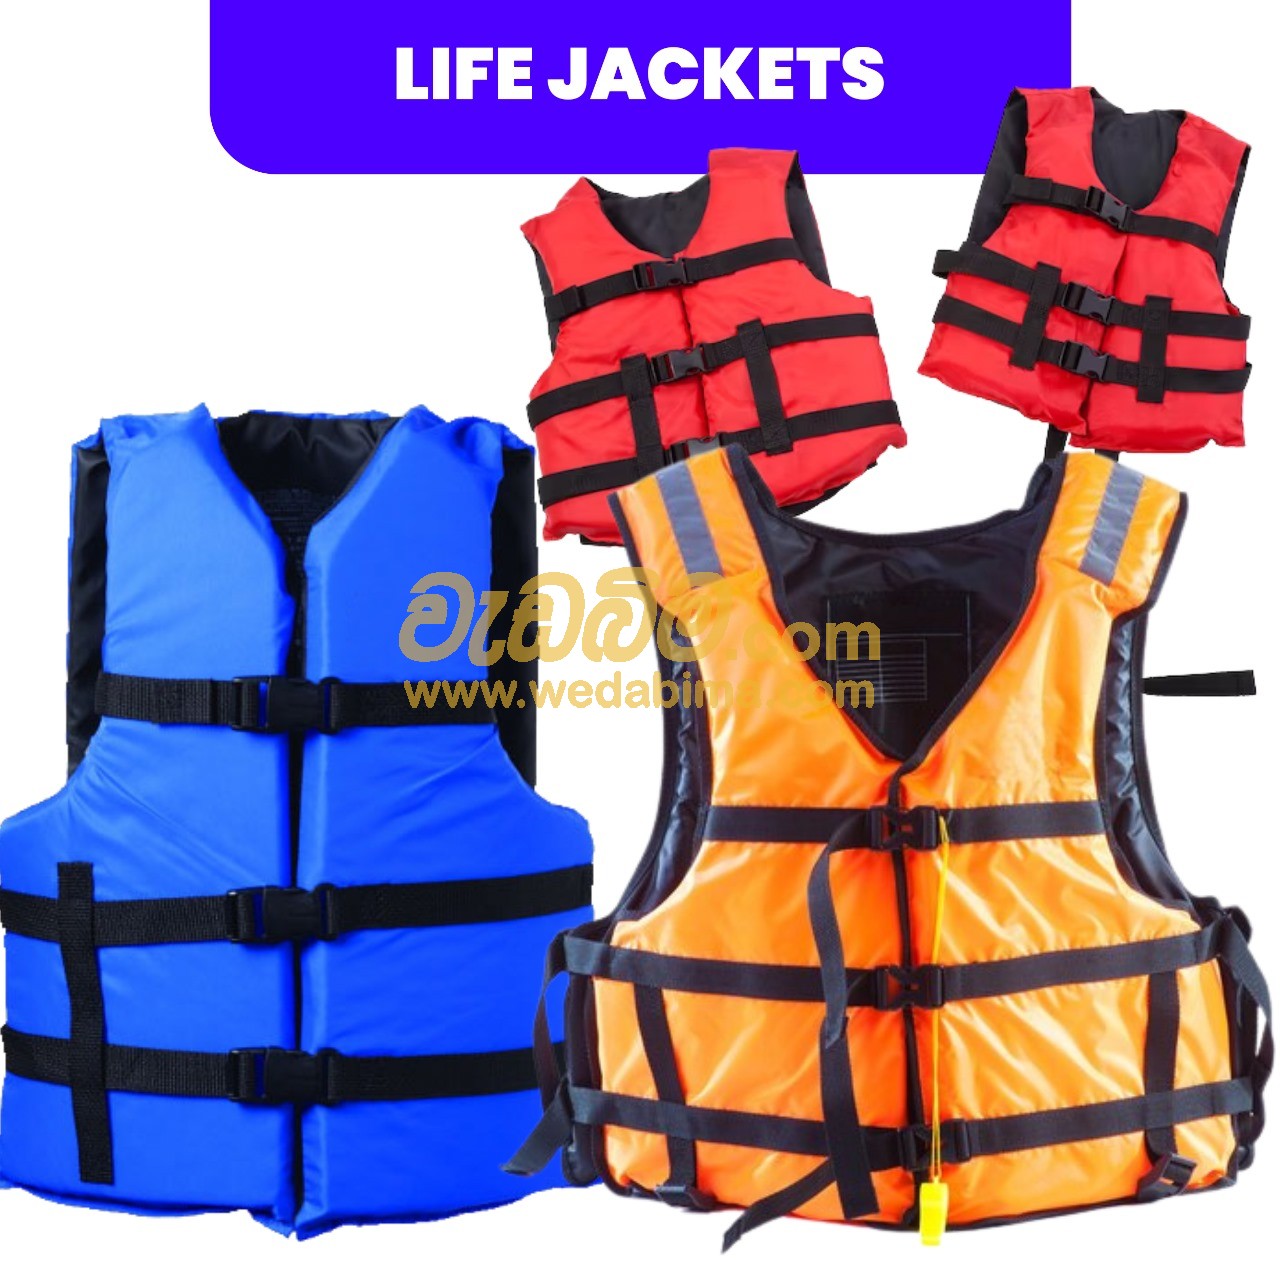 Safety Jackets Suppliers - Colombo